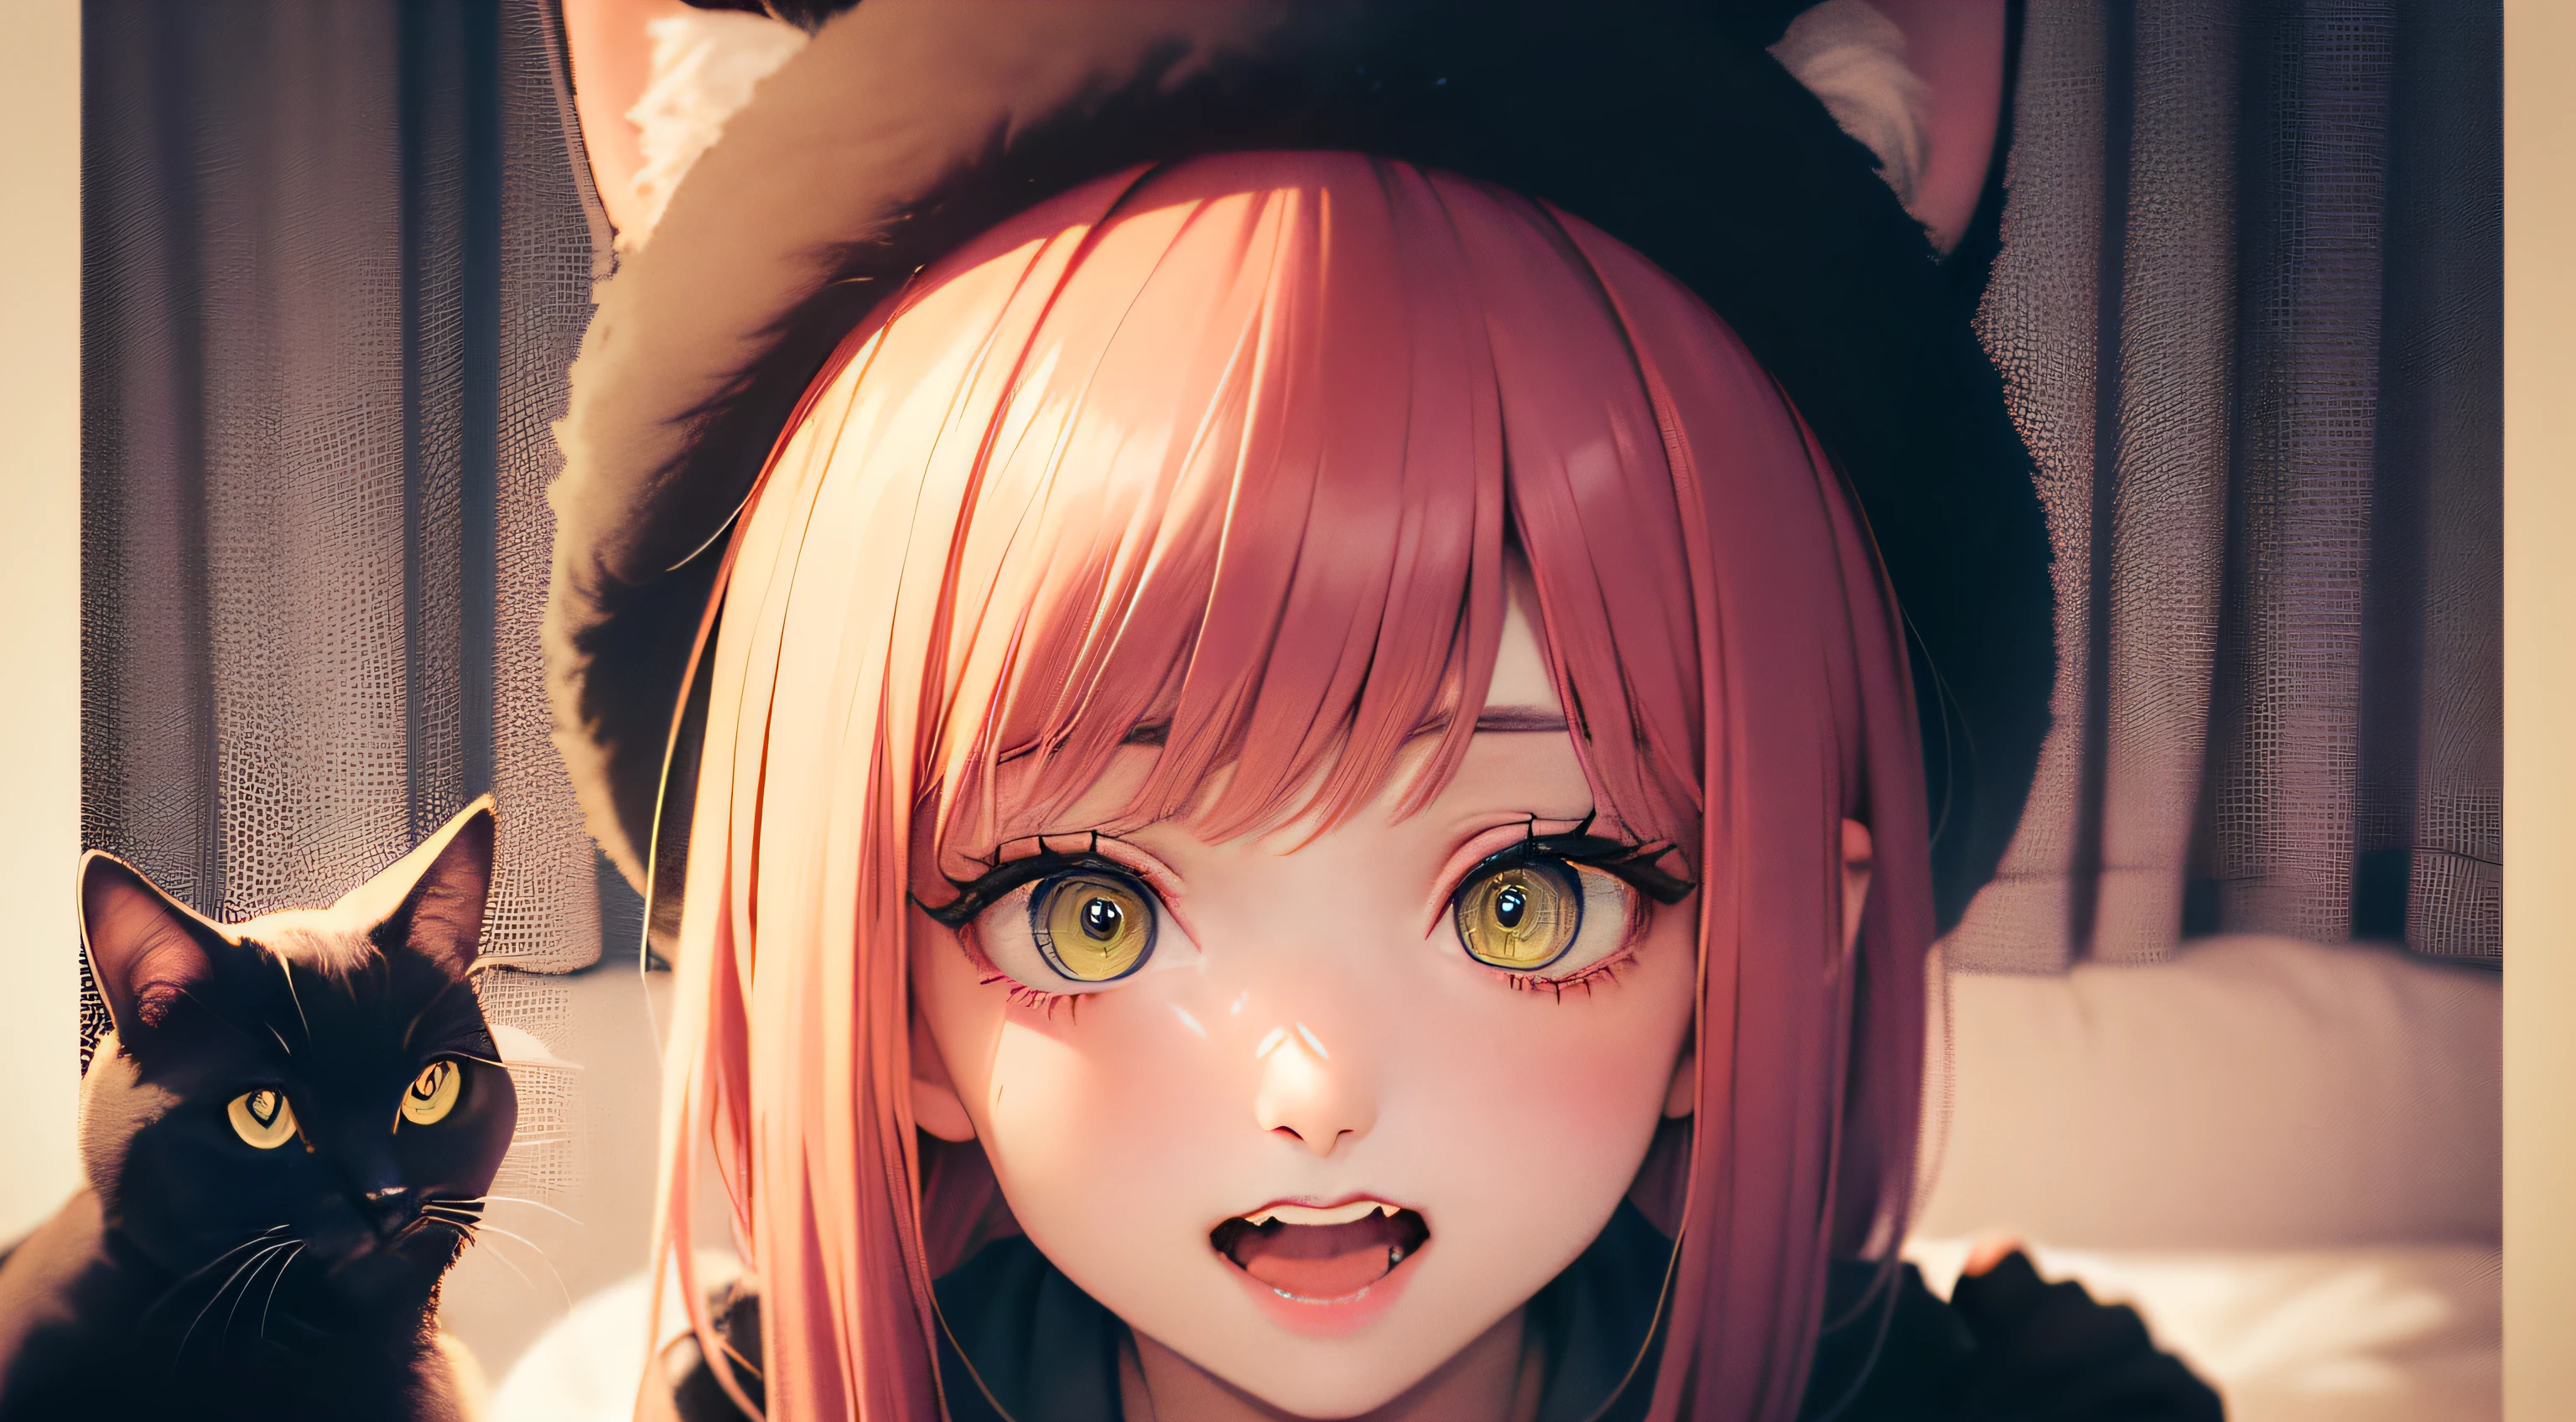 An anime girl with pink hair anD green eyes with a surpriseD expression on her face anD a black cat hat, (1 Mädchen:0.992), (:D:0.583), (bangs:0.701), (erröten:0.584), (grüne Augen: 0.992), (Looking at the AuDience: 0.711), (offener Mund: 0.760), (pinkes Haar: 0.917), (Schleife: 0.826), (kurzes Haar: 0.571), (lächeln: 0.855), (Allein: 0.949), (Zähne: 0.770), (Upper BoDy: 0.760)